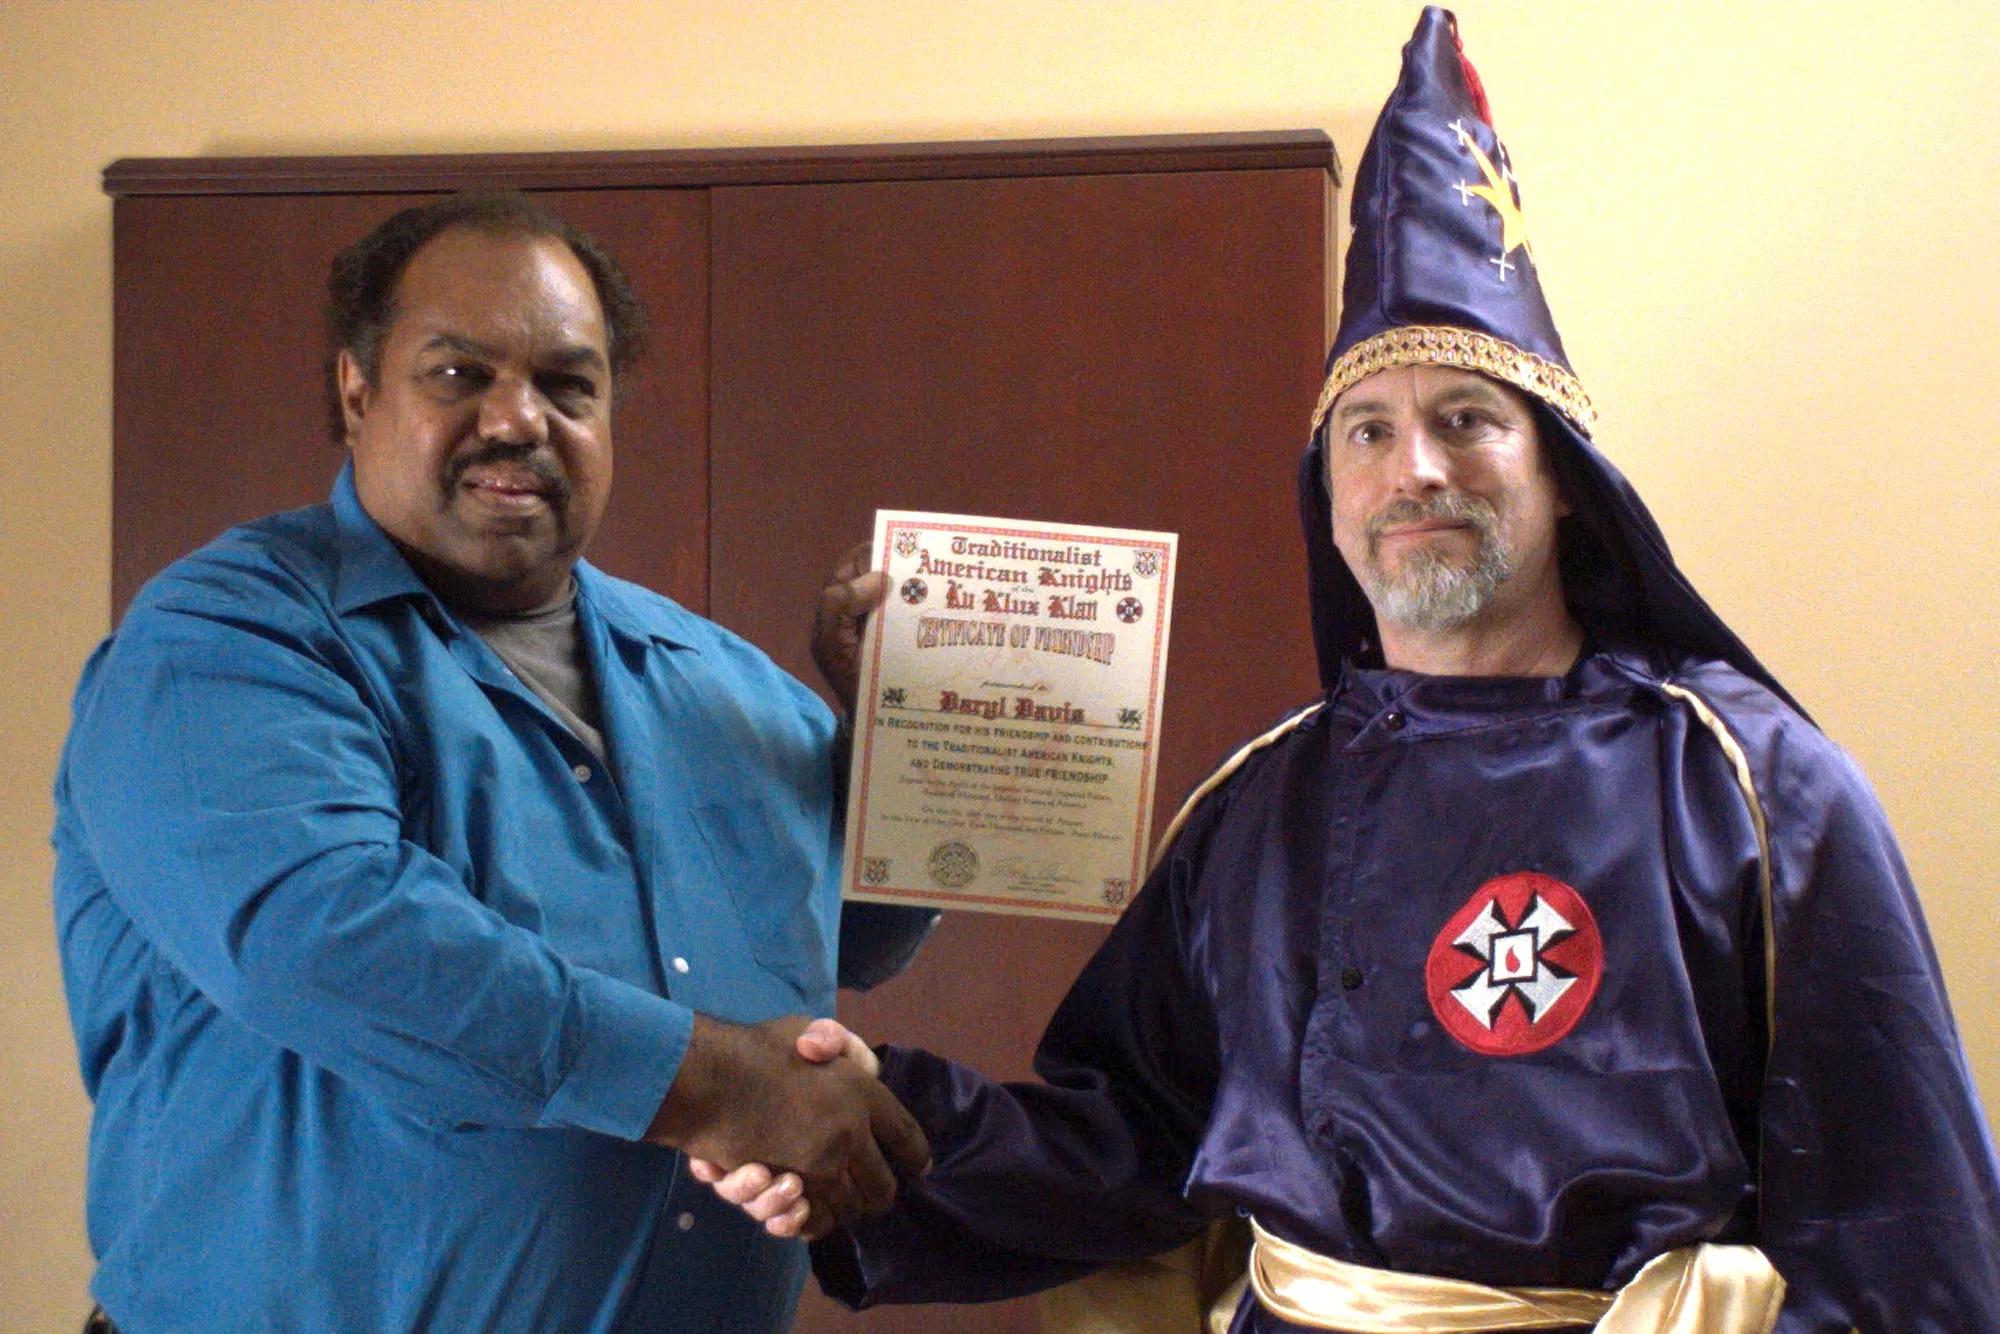 Daryl Davis Convinced Over 200 Ku Klux Klan Members To Give Up Their Robes